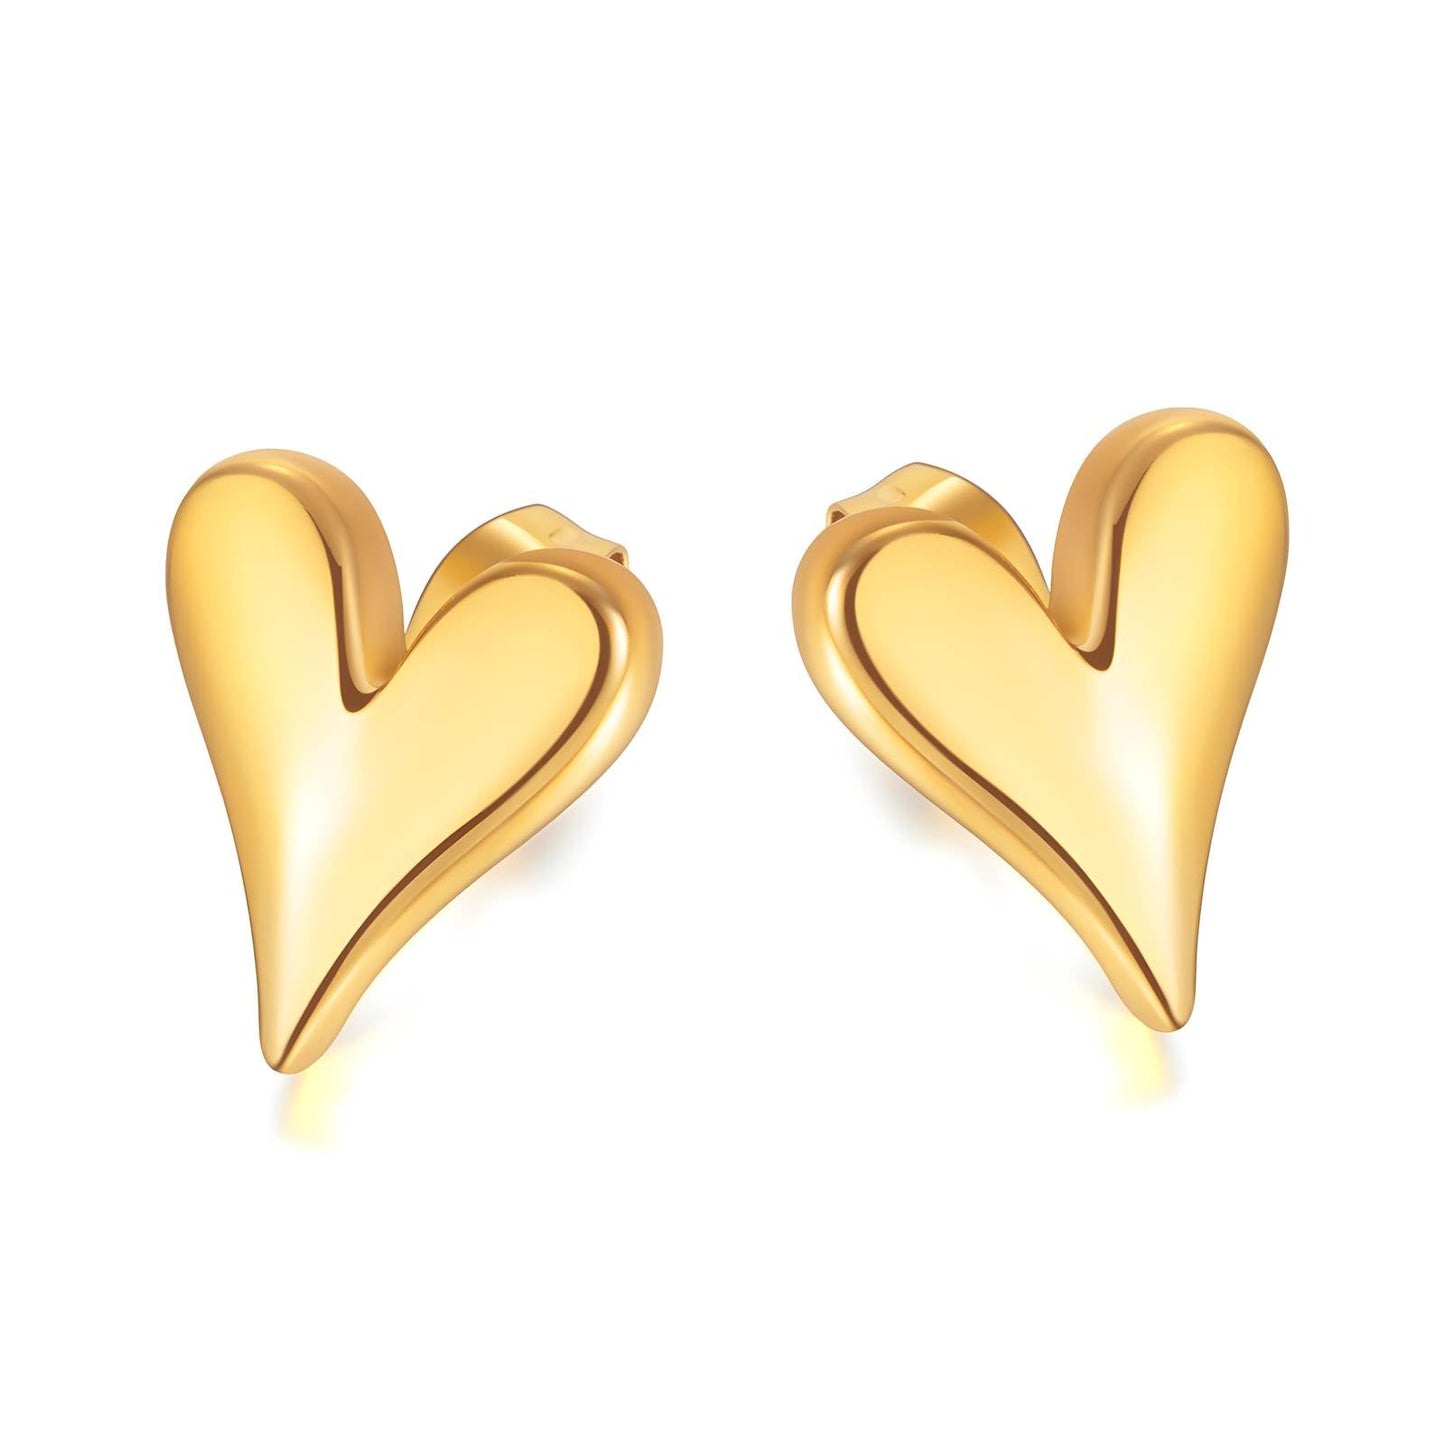 Crazy heart stud earring - Gold Plated Tarnish Free Jewellery